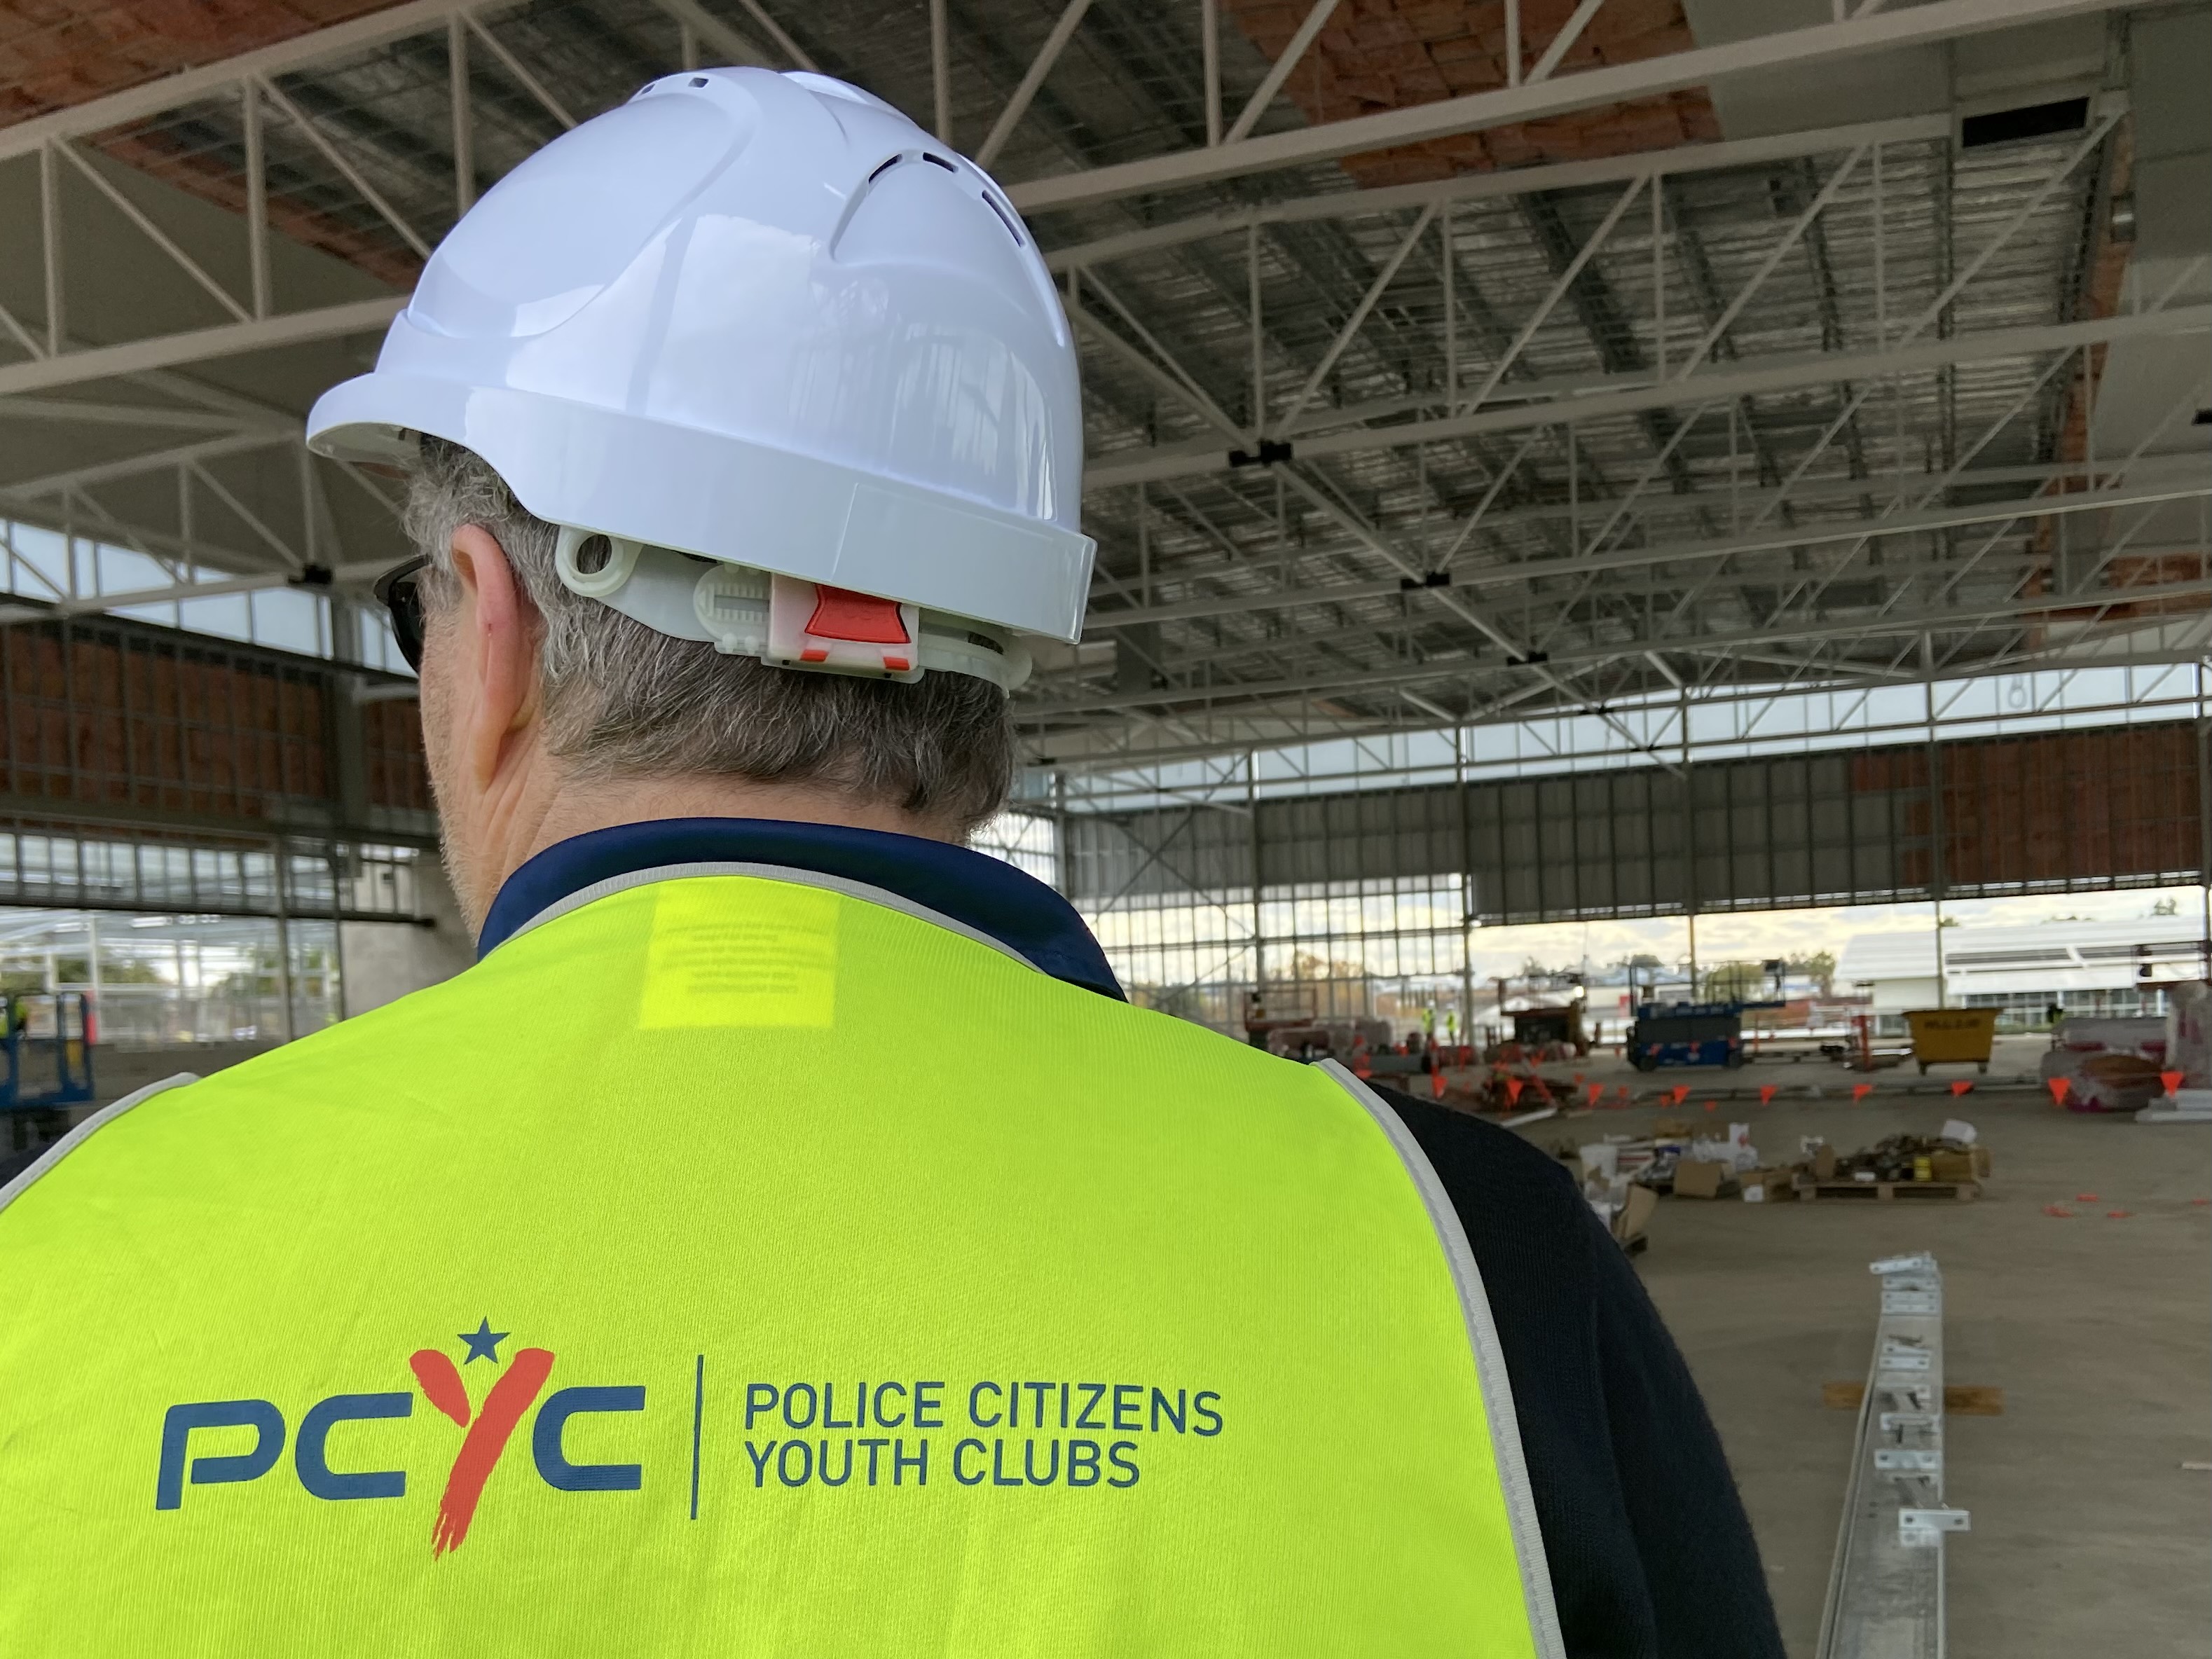 Wagga's new PCYC remains on track and on mission